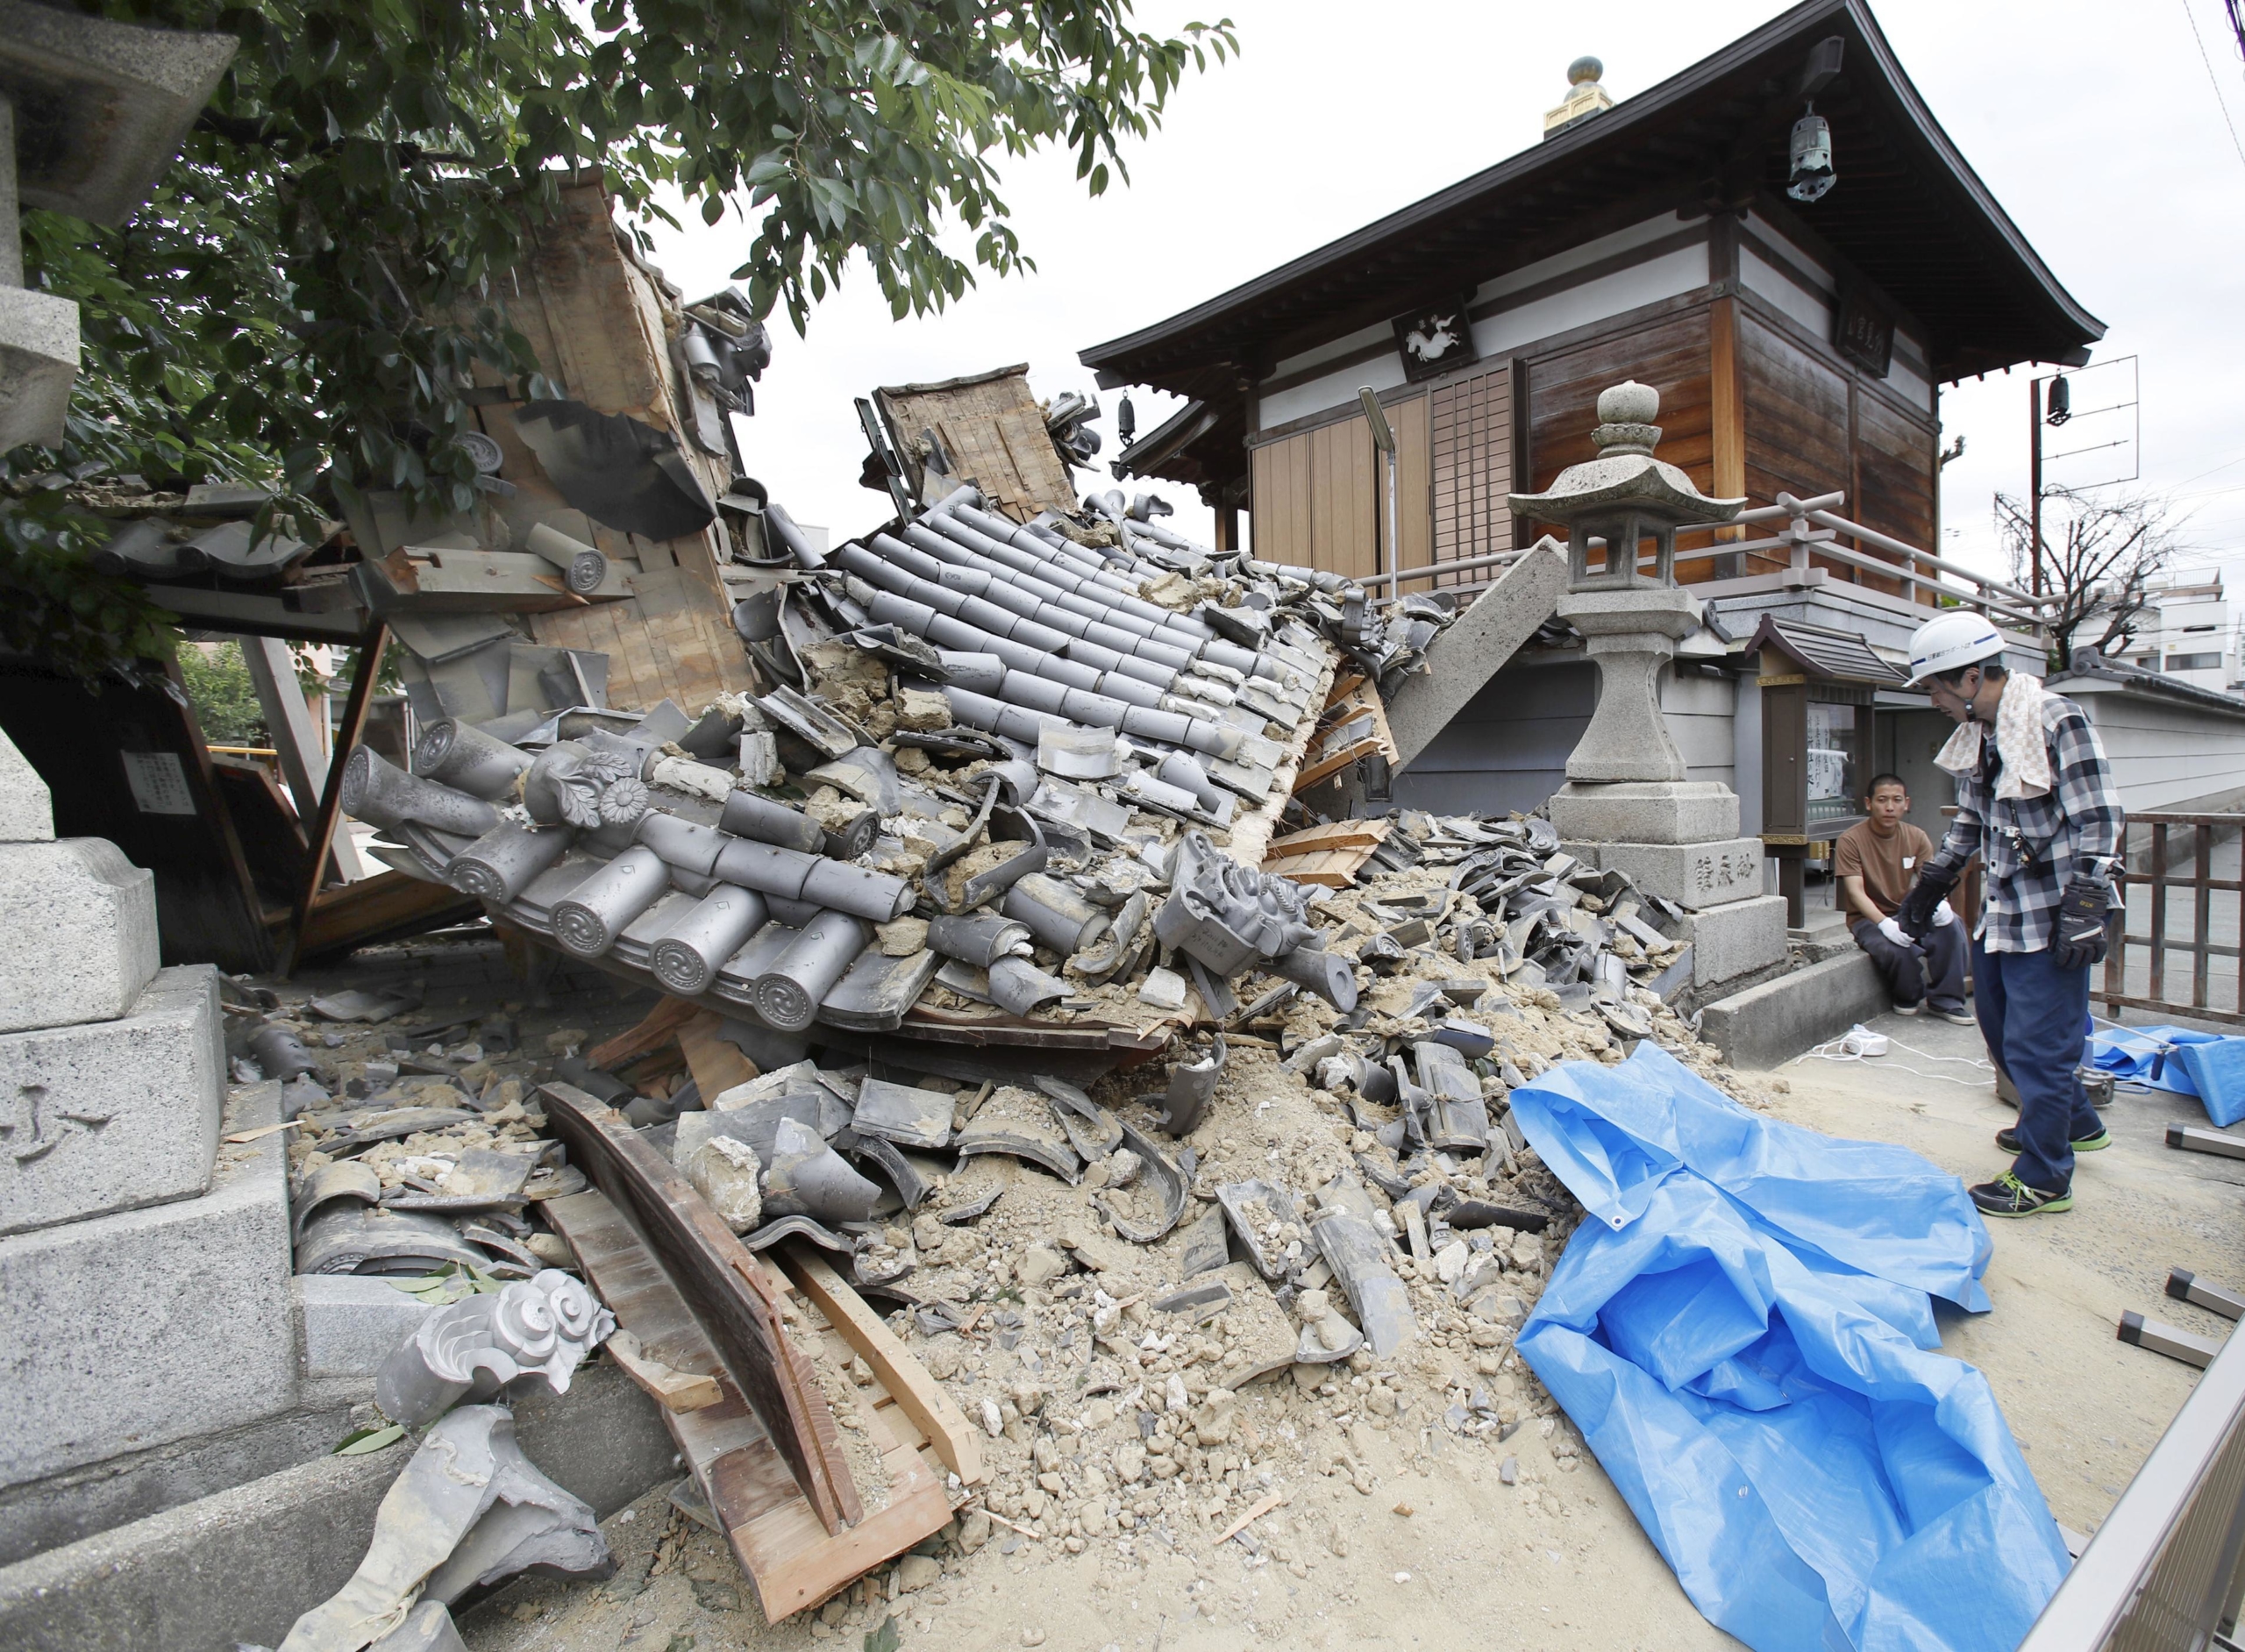 The gate of a temple collapses after an earthquake hit Ibaraki city, Osaka Prefecture, on June 18, 2018. | KYODO